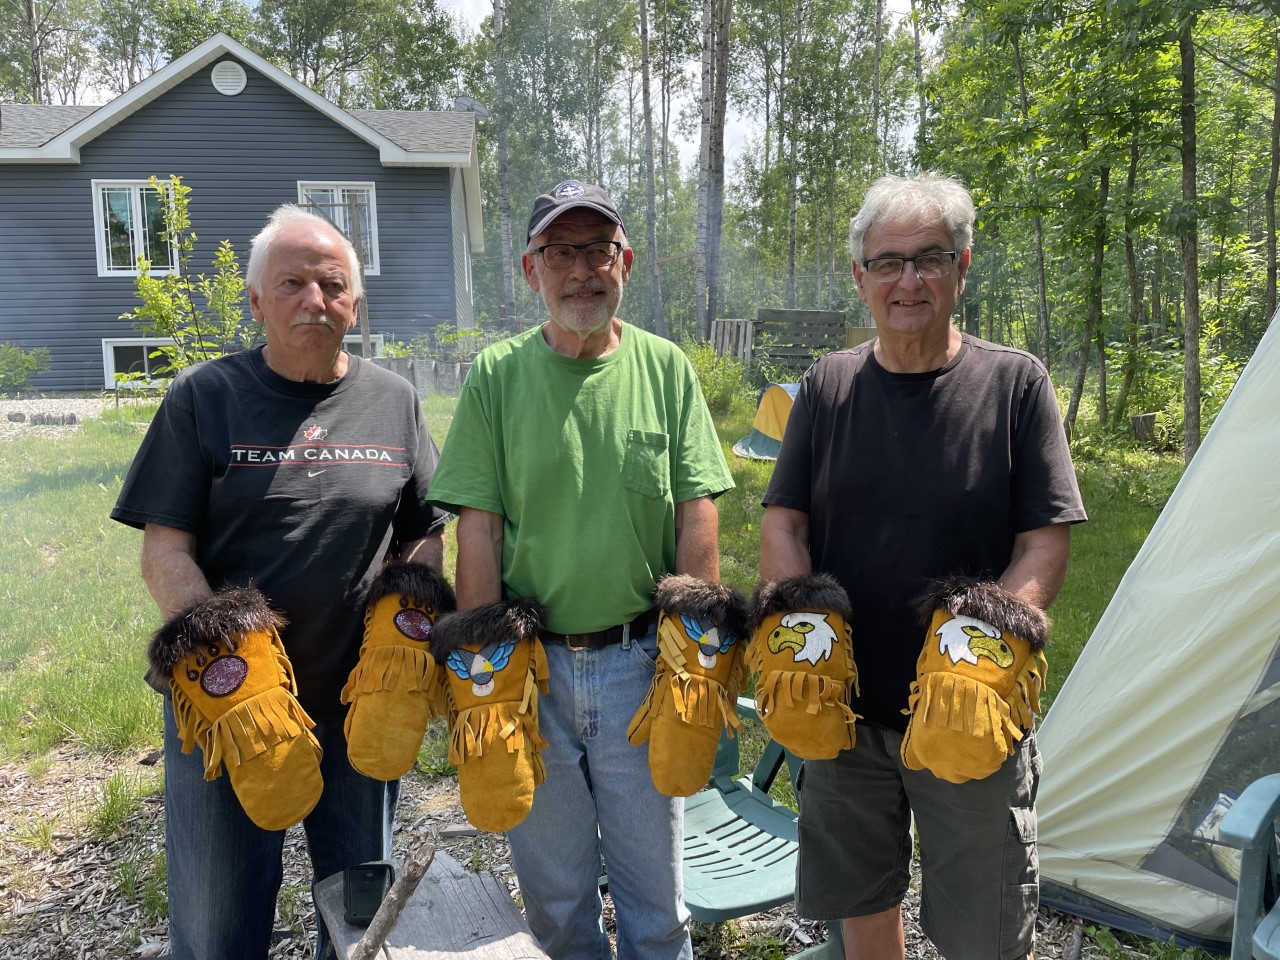 Three men holding mitts in the woods.